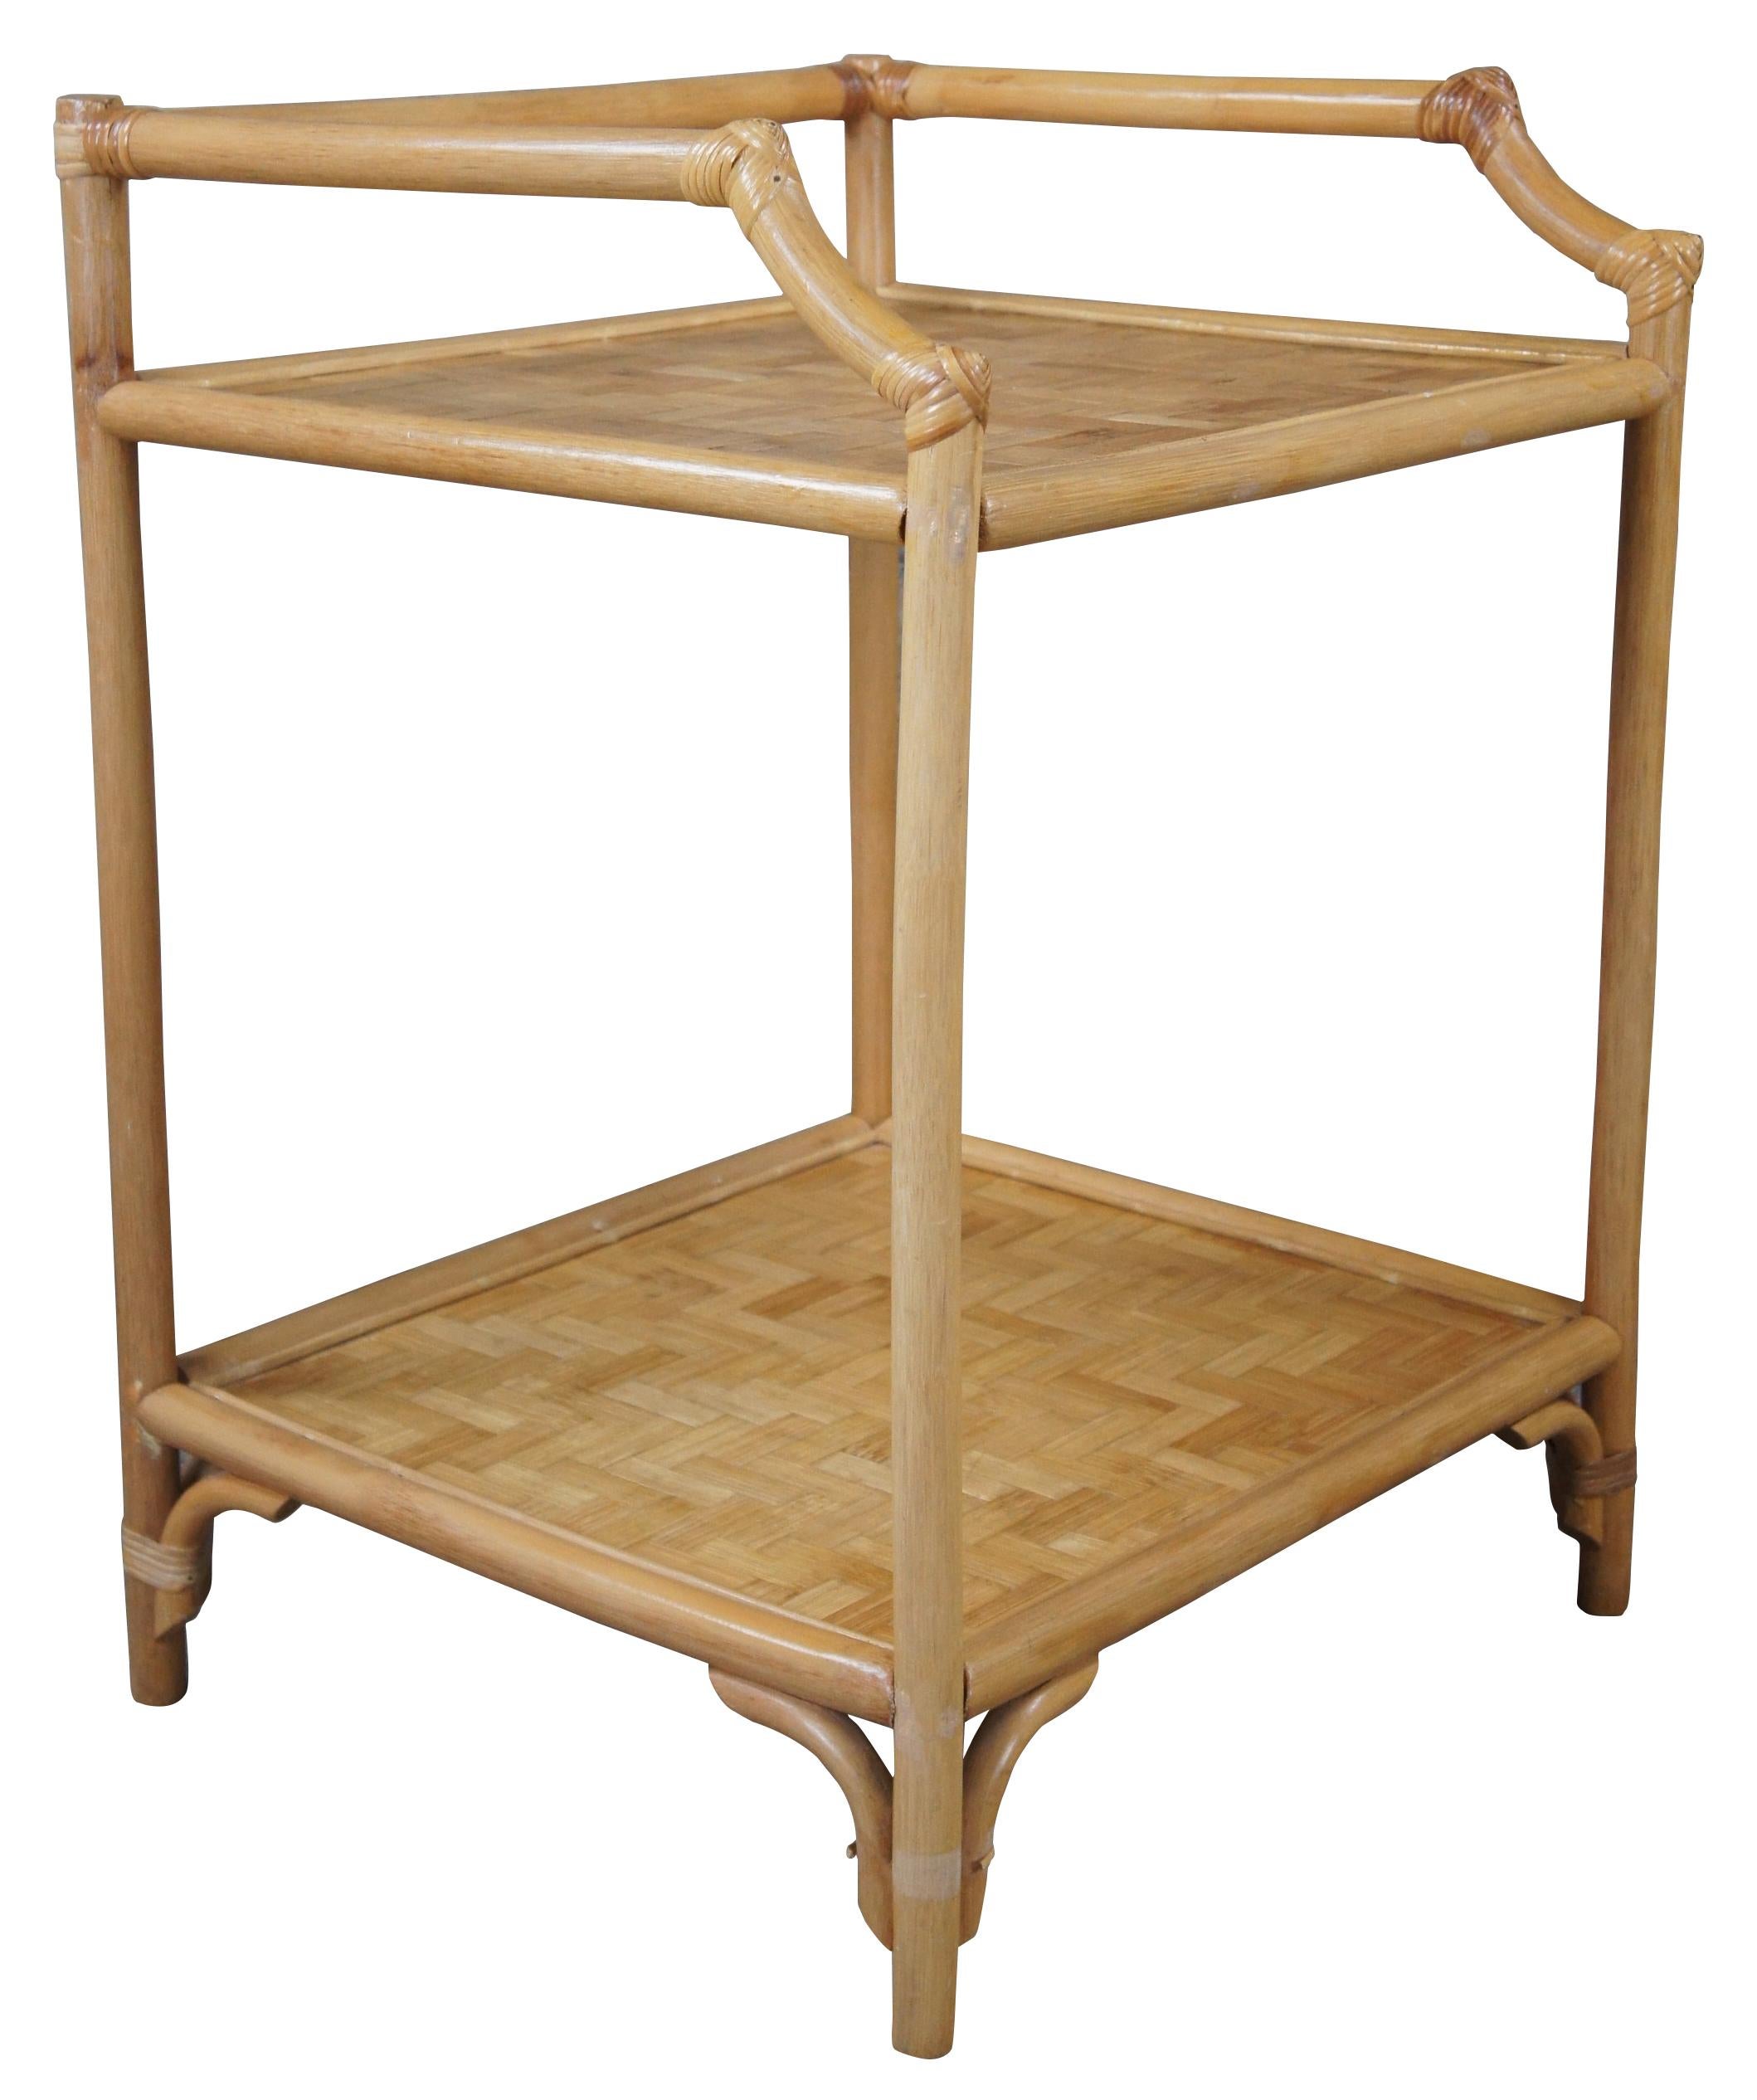 Vintage Hollywood Regency / Bohemian end table or plant stand, circa last quarter 20th century.  Features a bamboo frame with geometric rattan panels. 

20